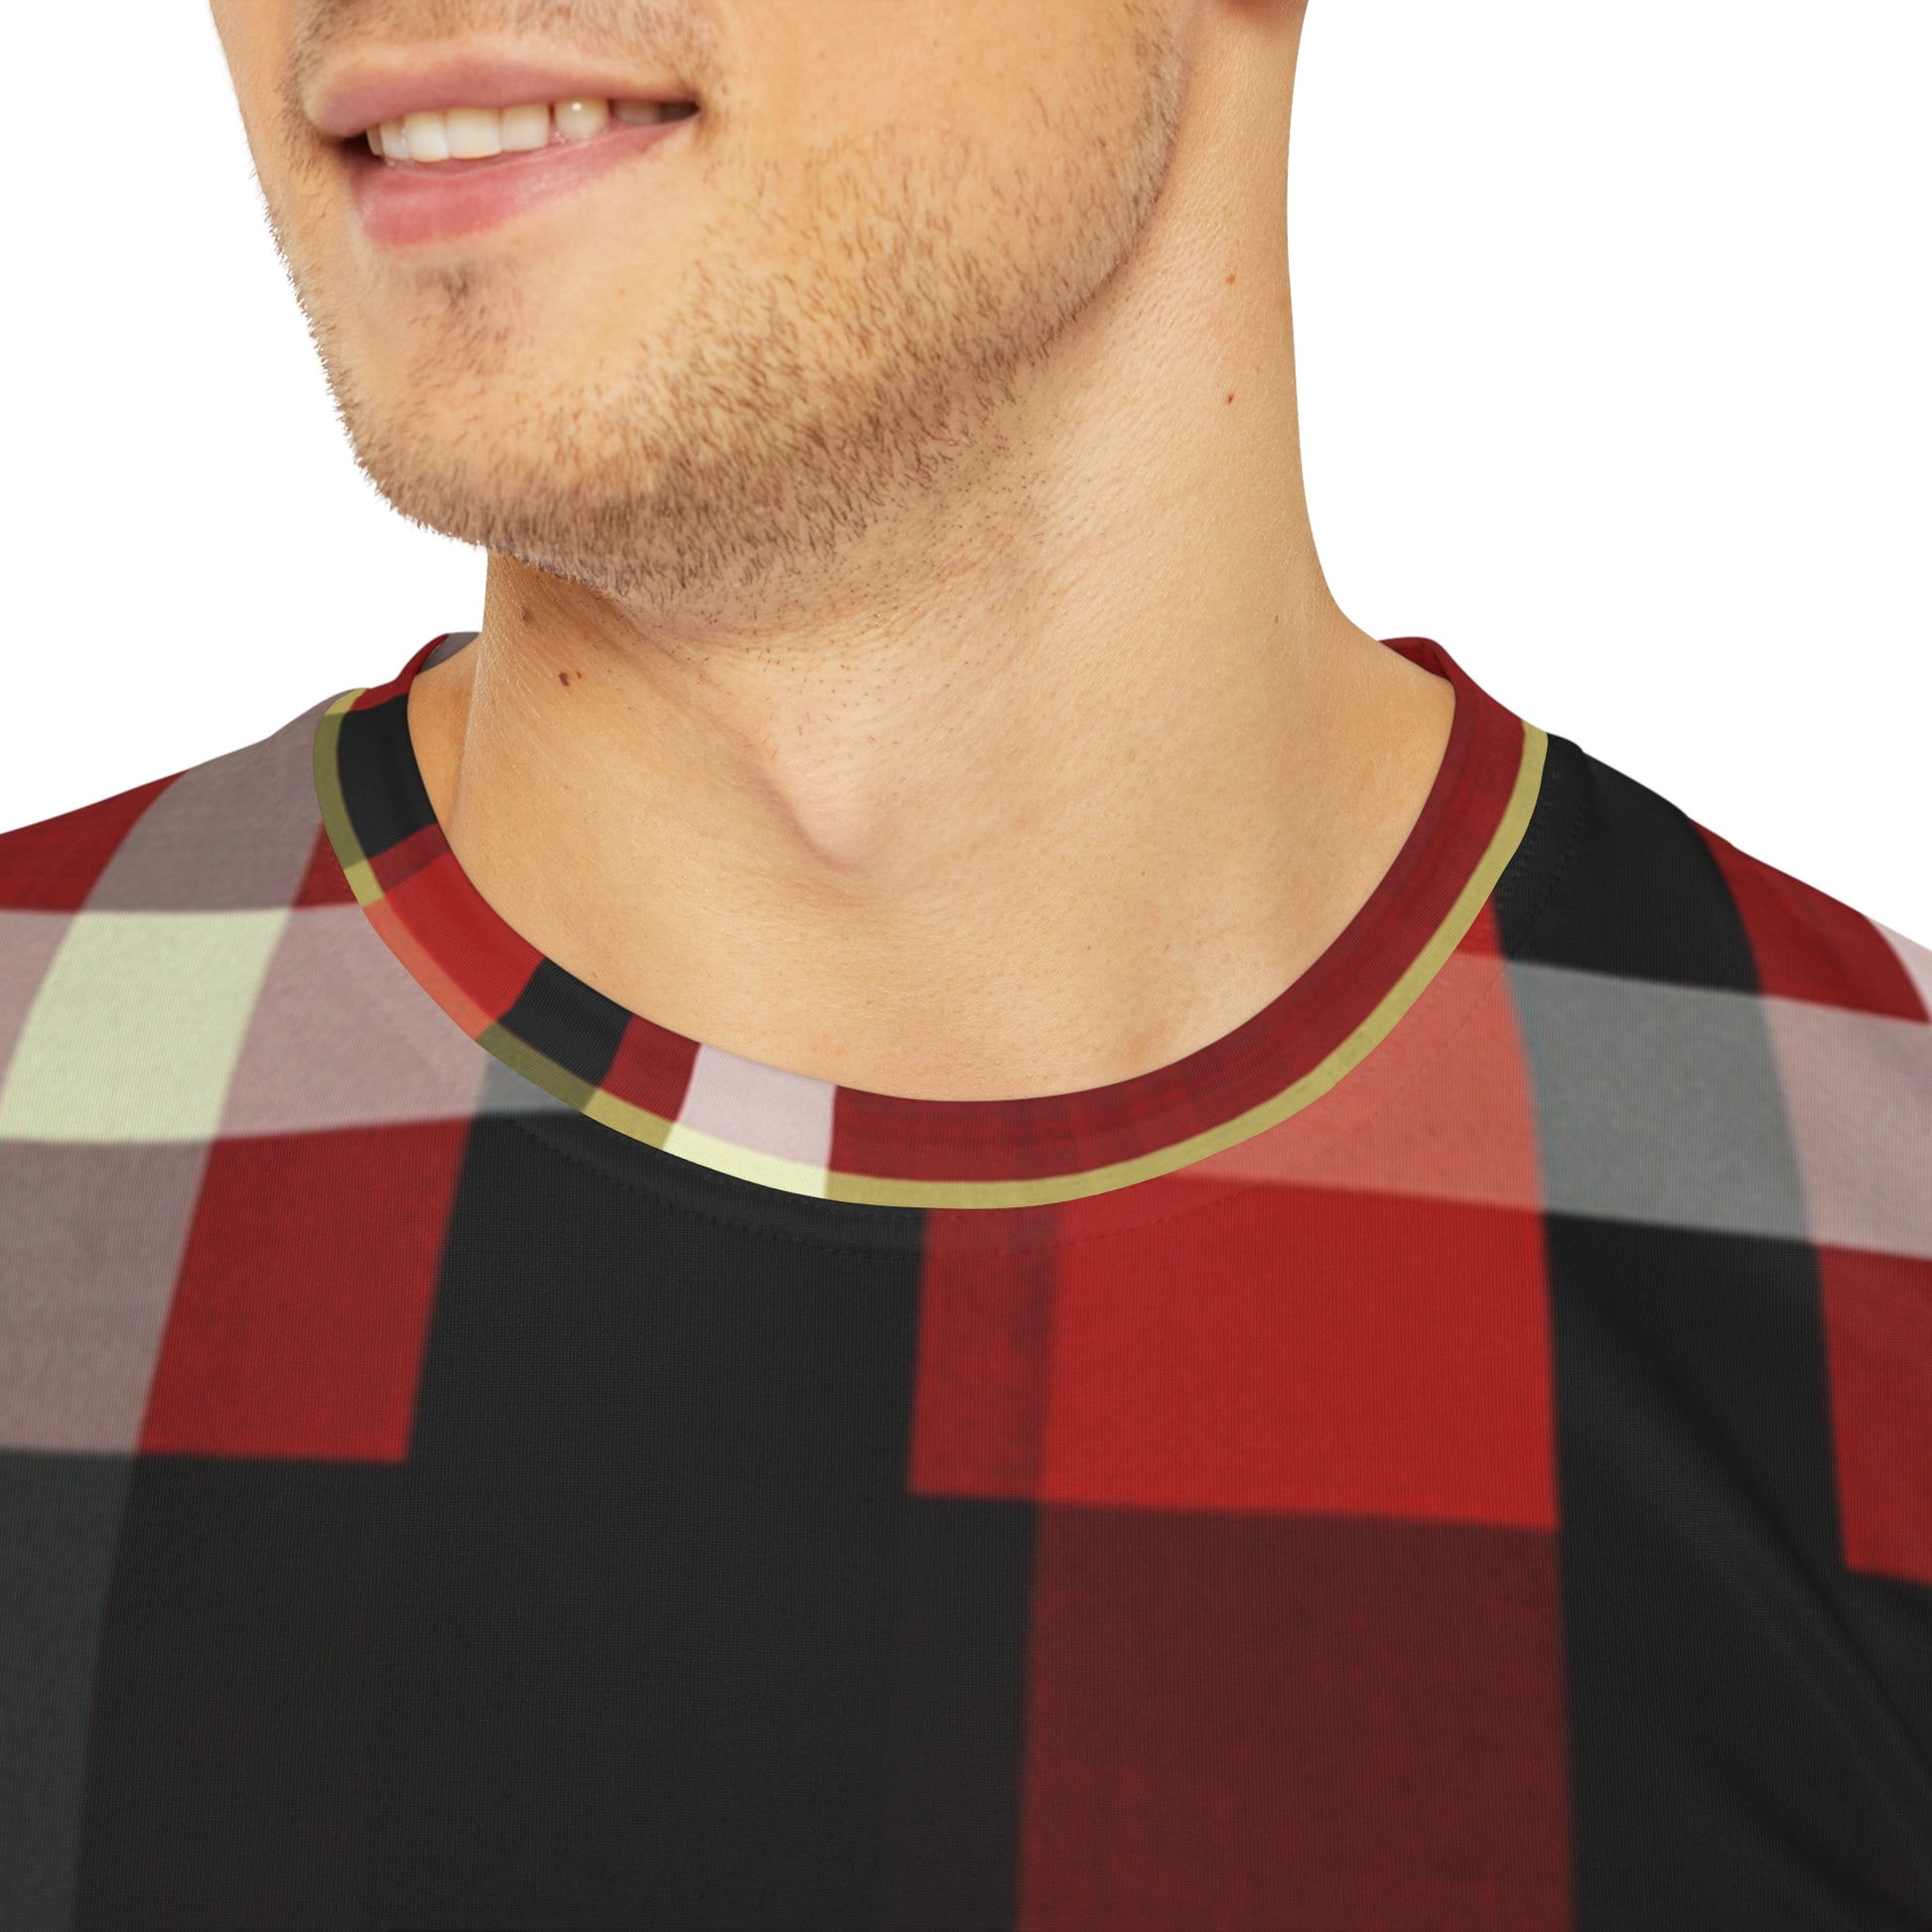 Close-up shot of the Highlander's Dawn Tartan Crewneck Pullover Short-Sleeved Shirt red black white yellow plaid pattern worn by a white man